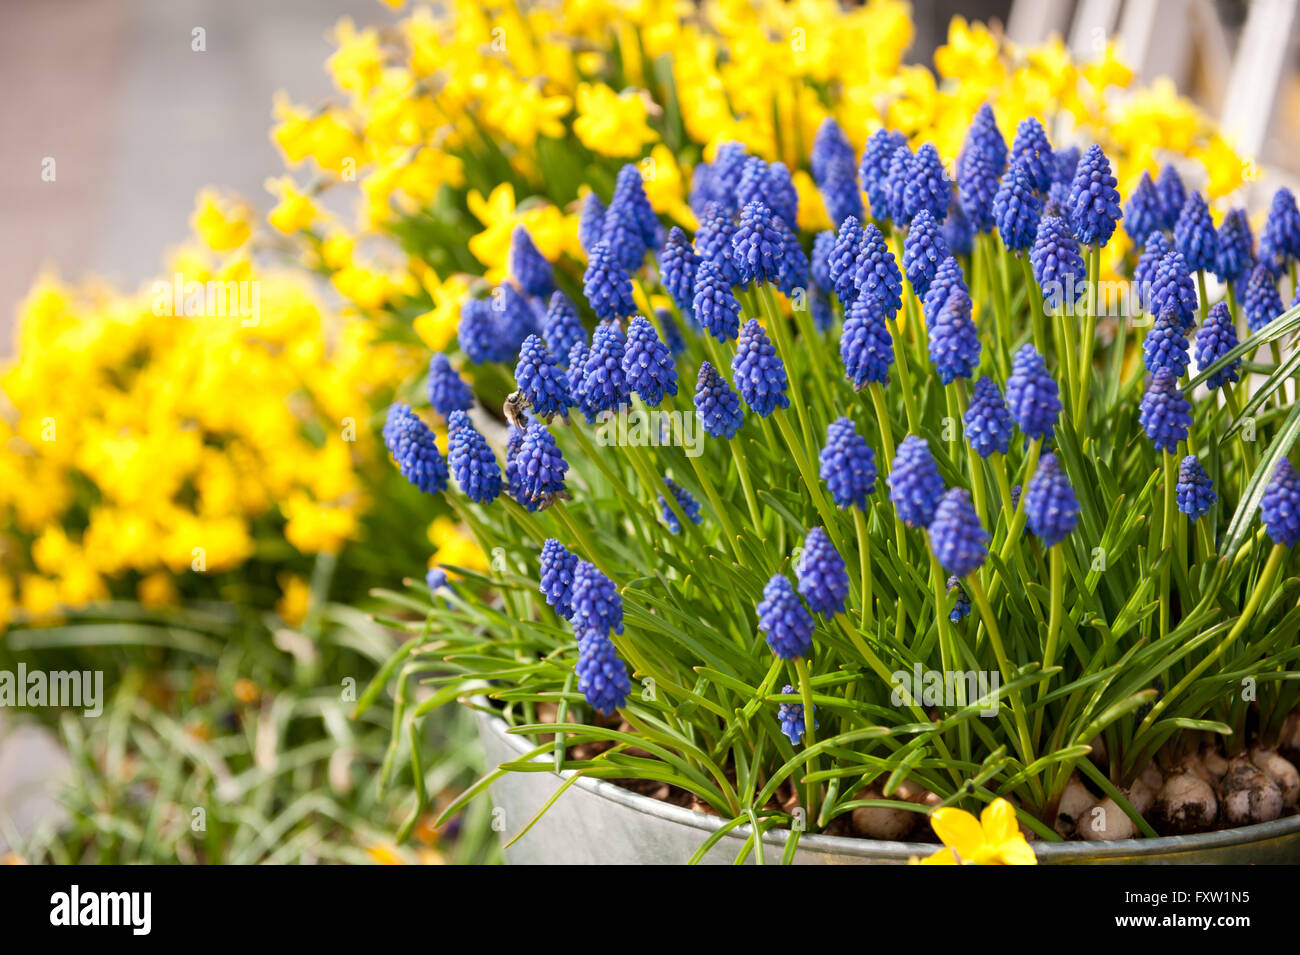 Grape hyacinth and daffodil flowering, natural flowers city decoration, yellow and blue flowering plants in metal flowerpot Stock Photo